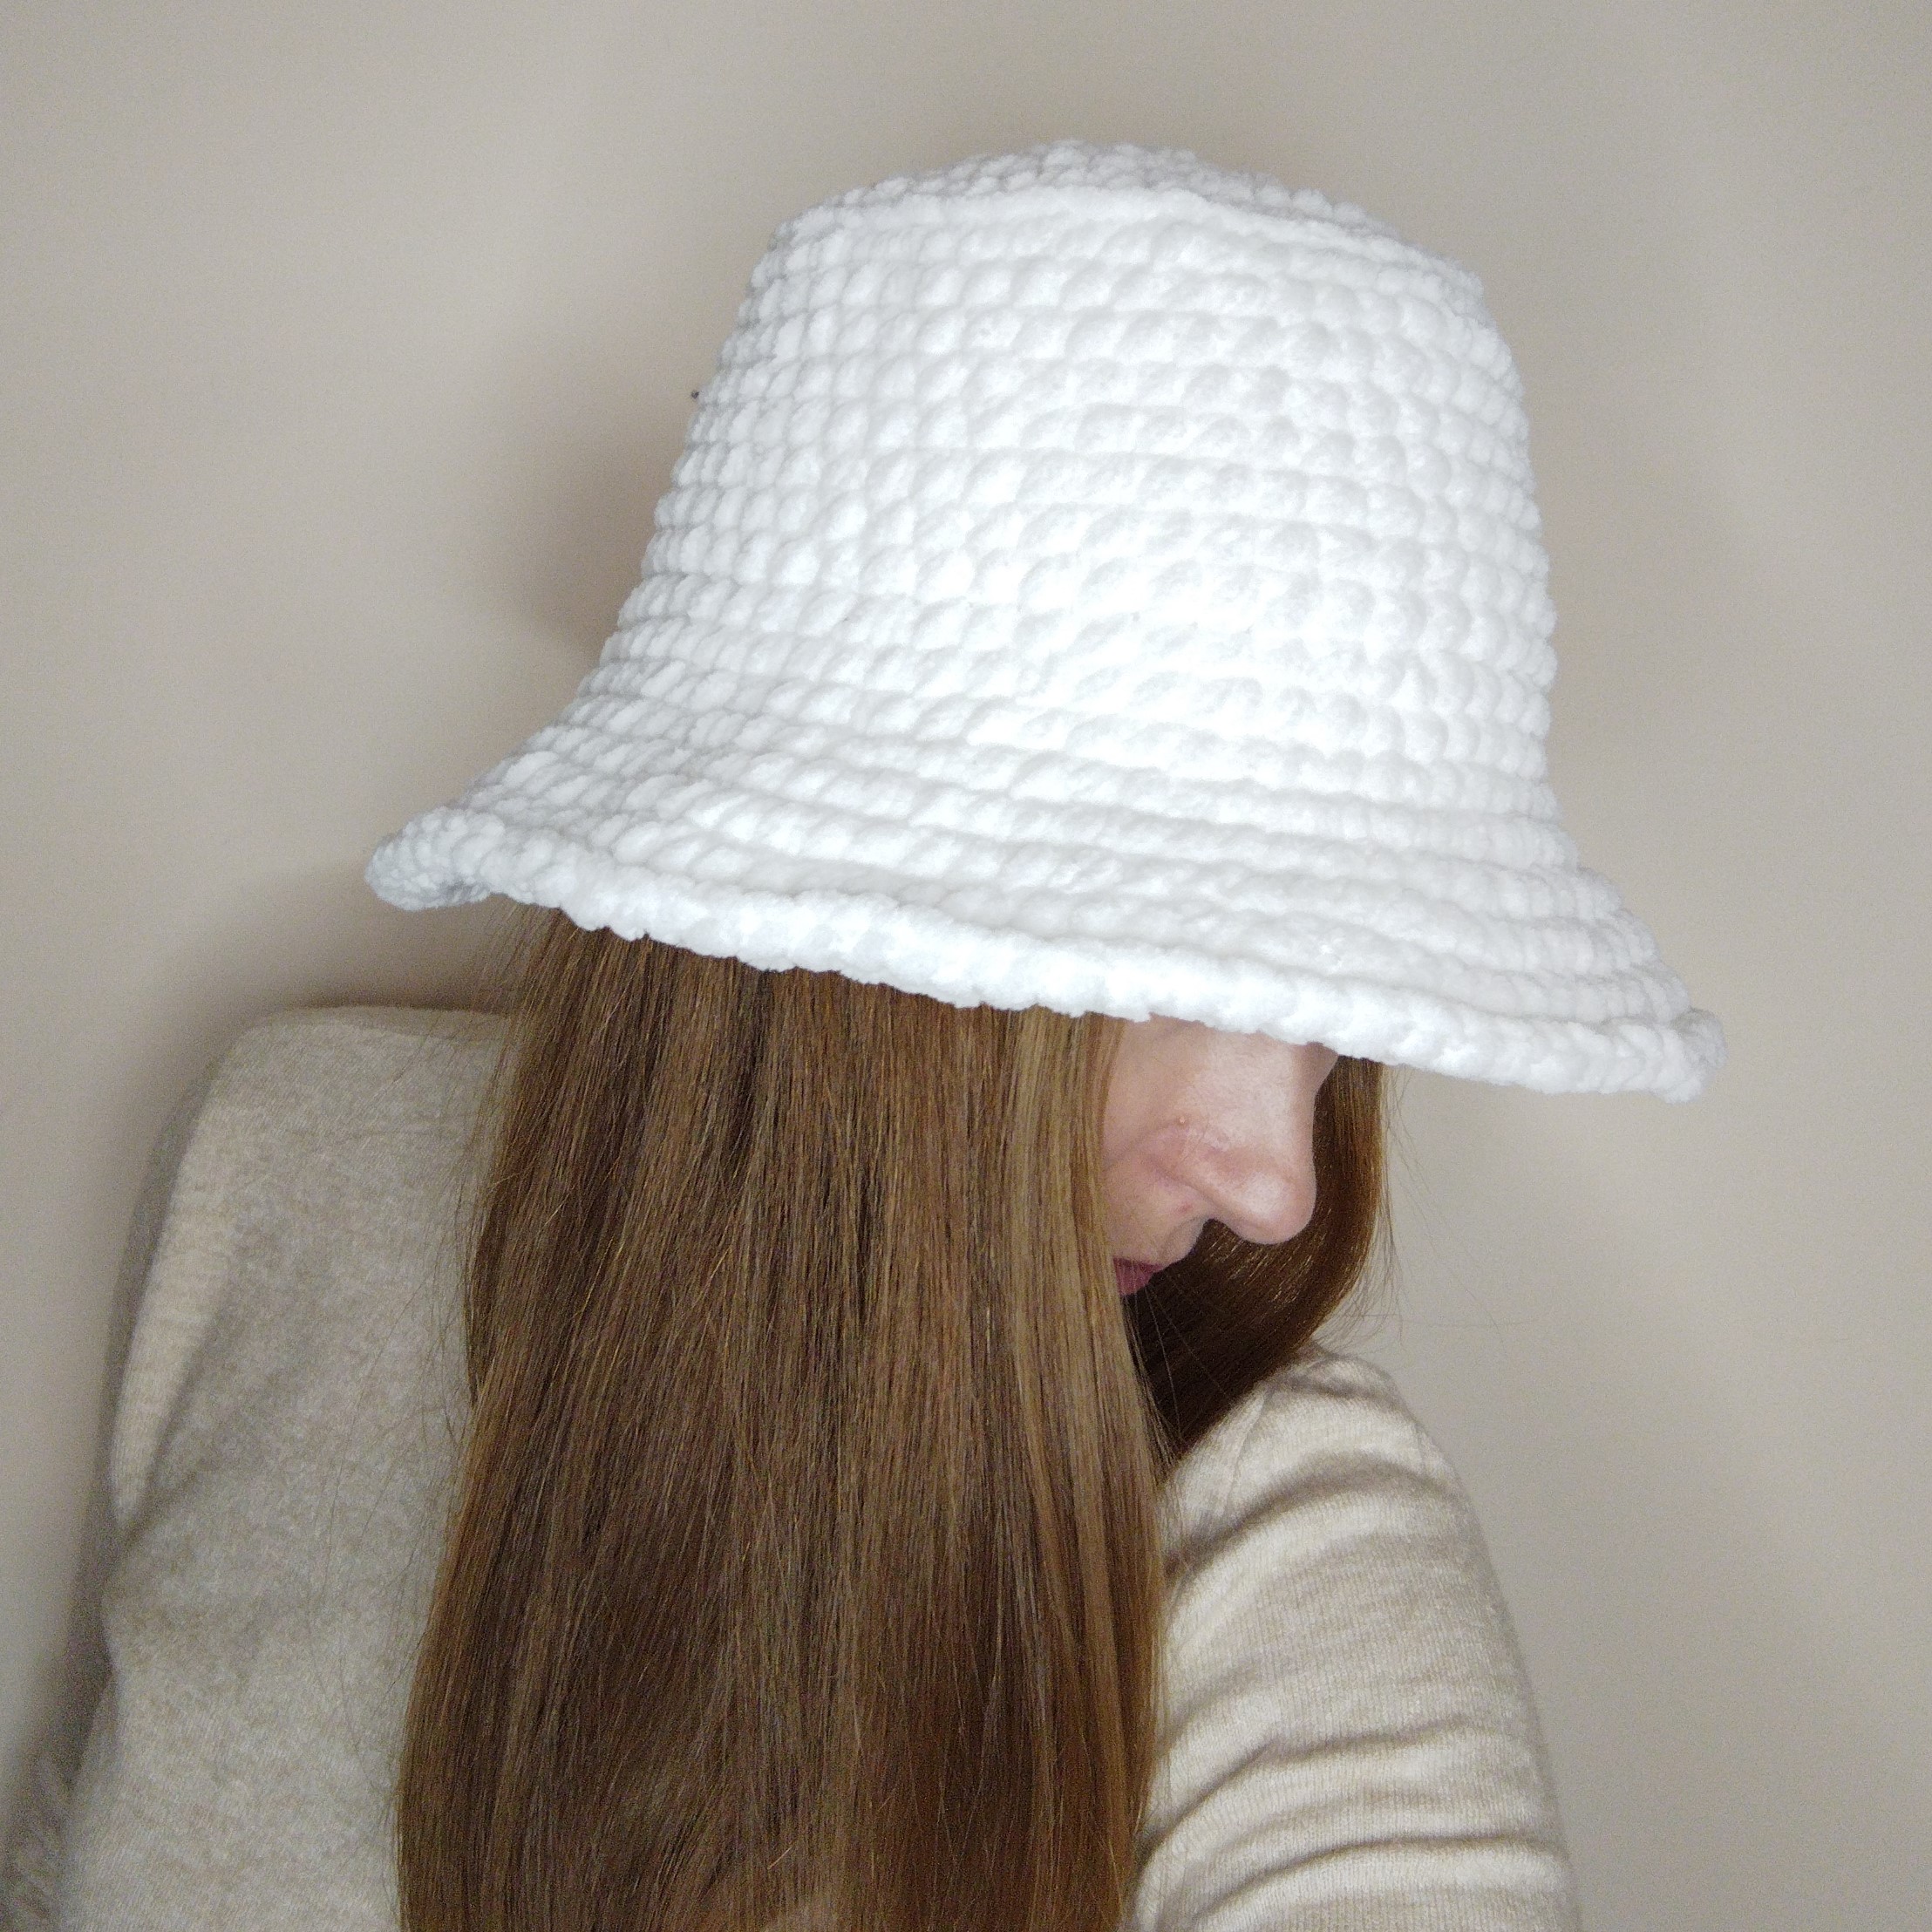 Cute Crochet Bucket Hats to Keep Your Cool This Summer